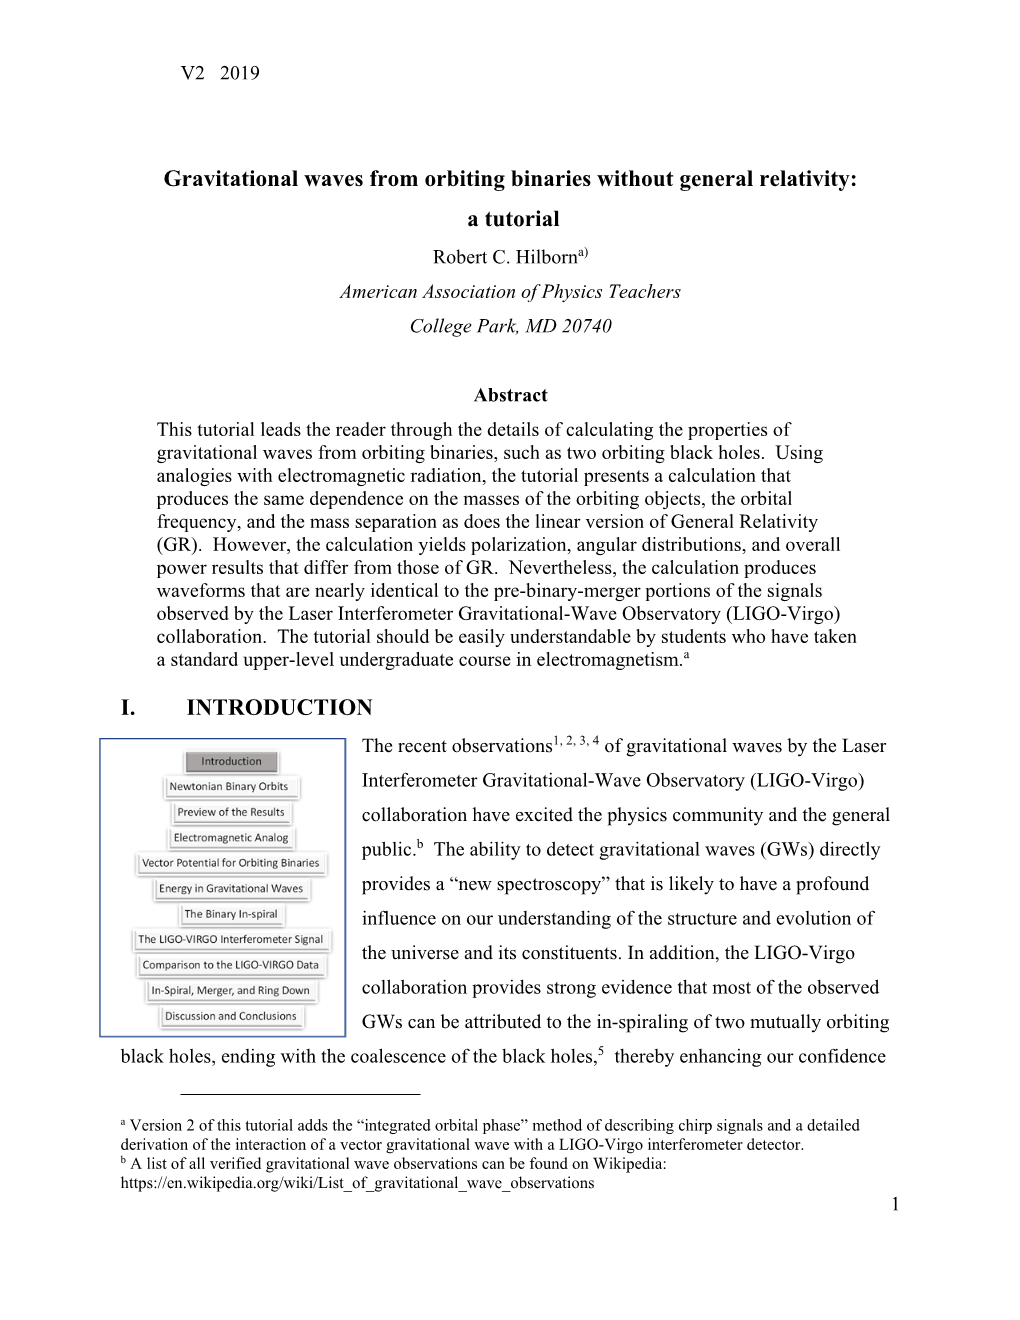 Gravitational Waves from Orbiting Binaries Without General Relativity: a Tutorial Robert C